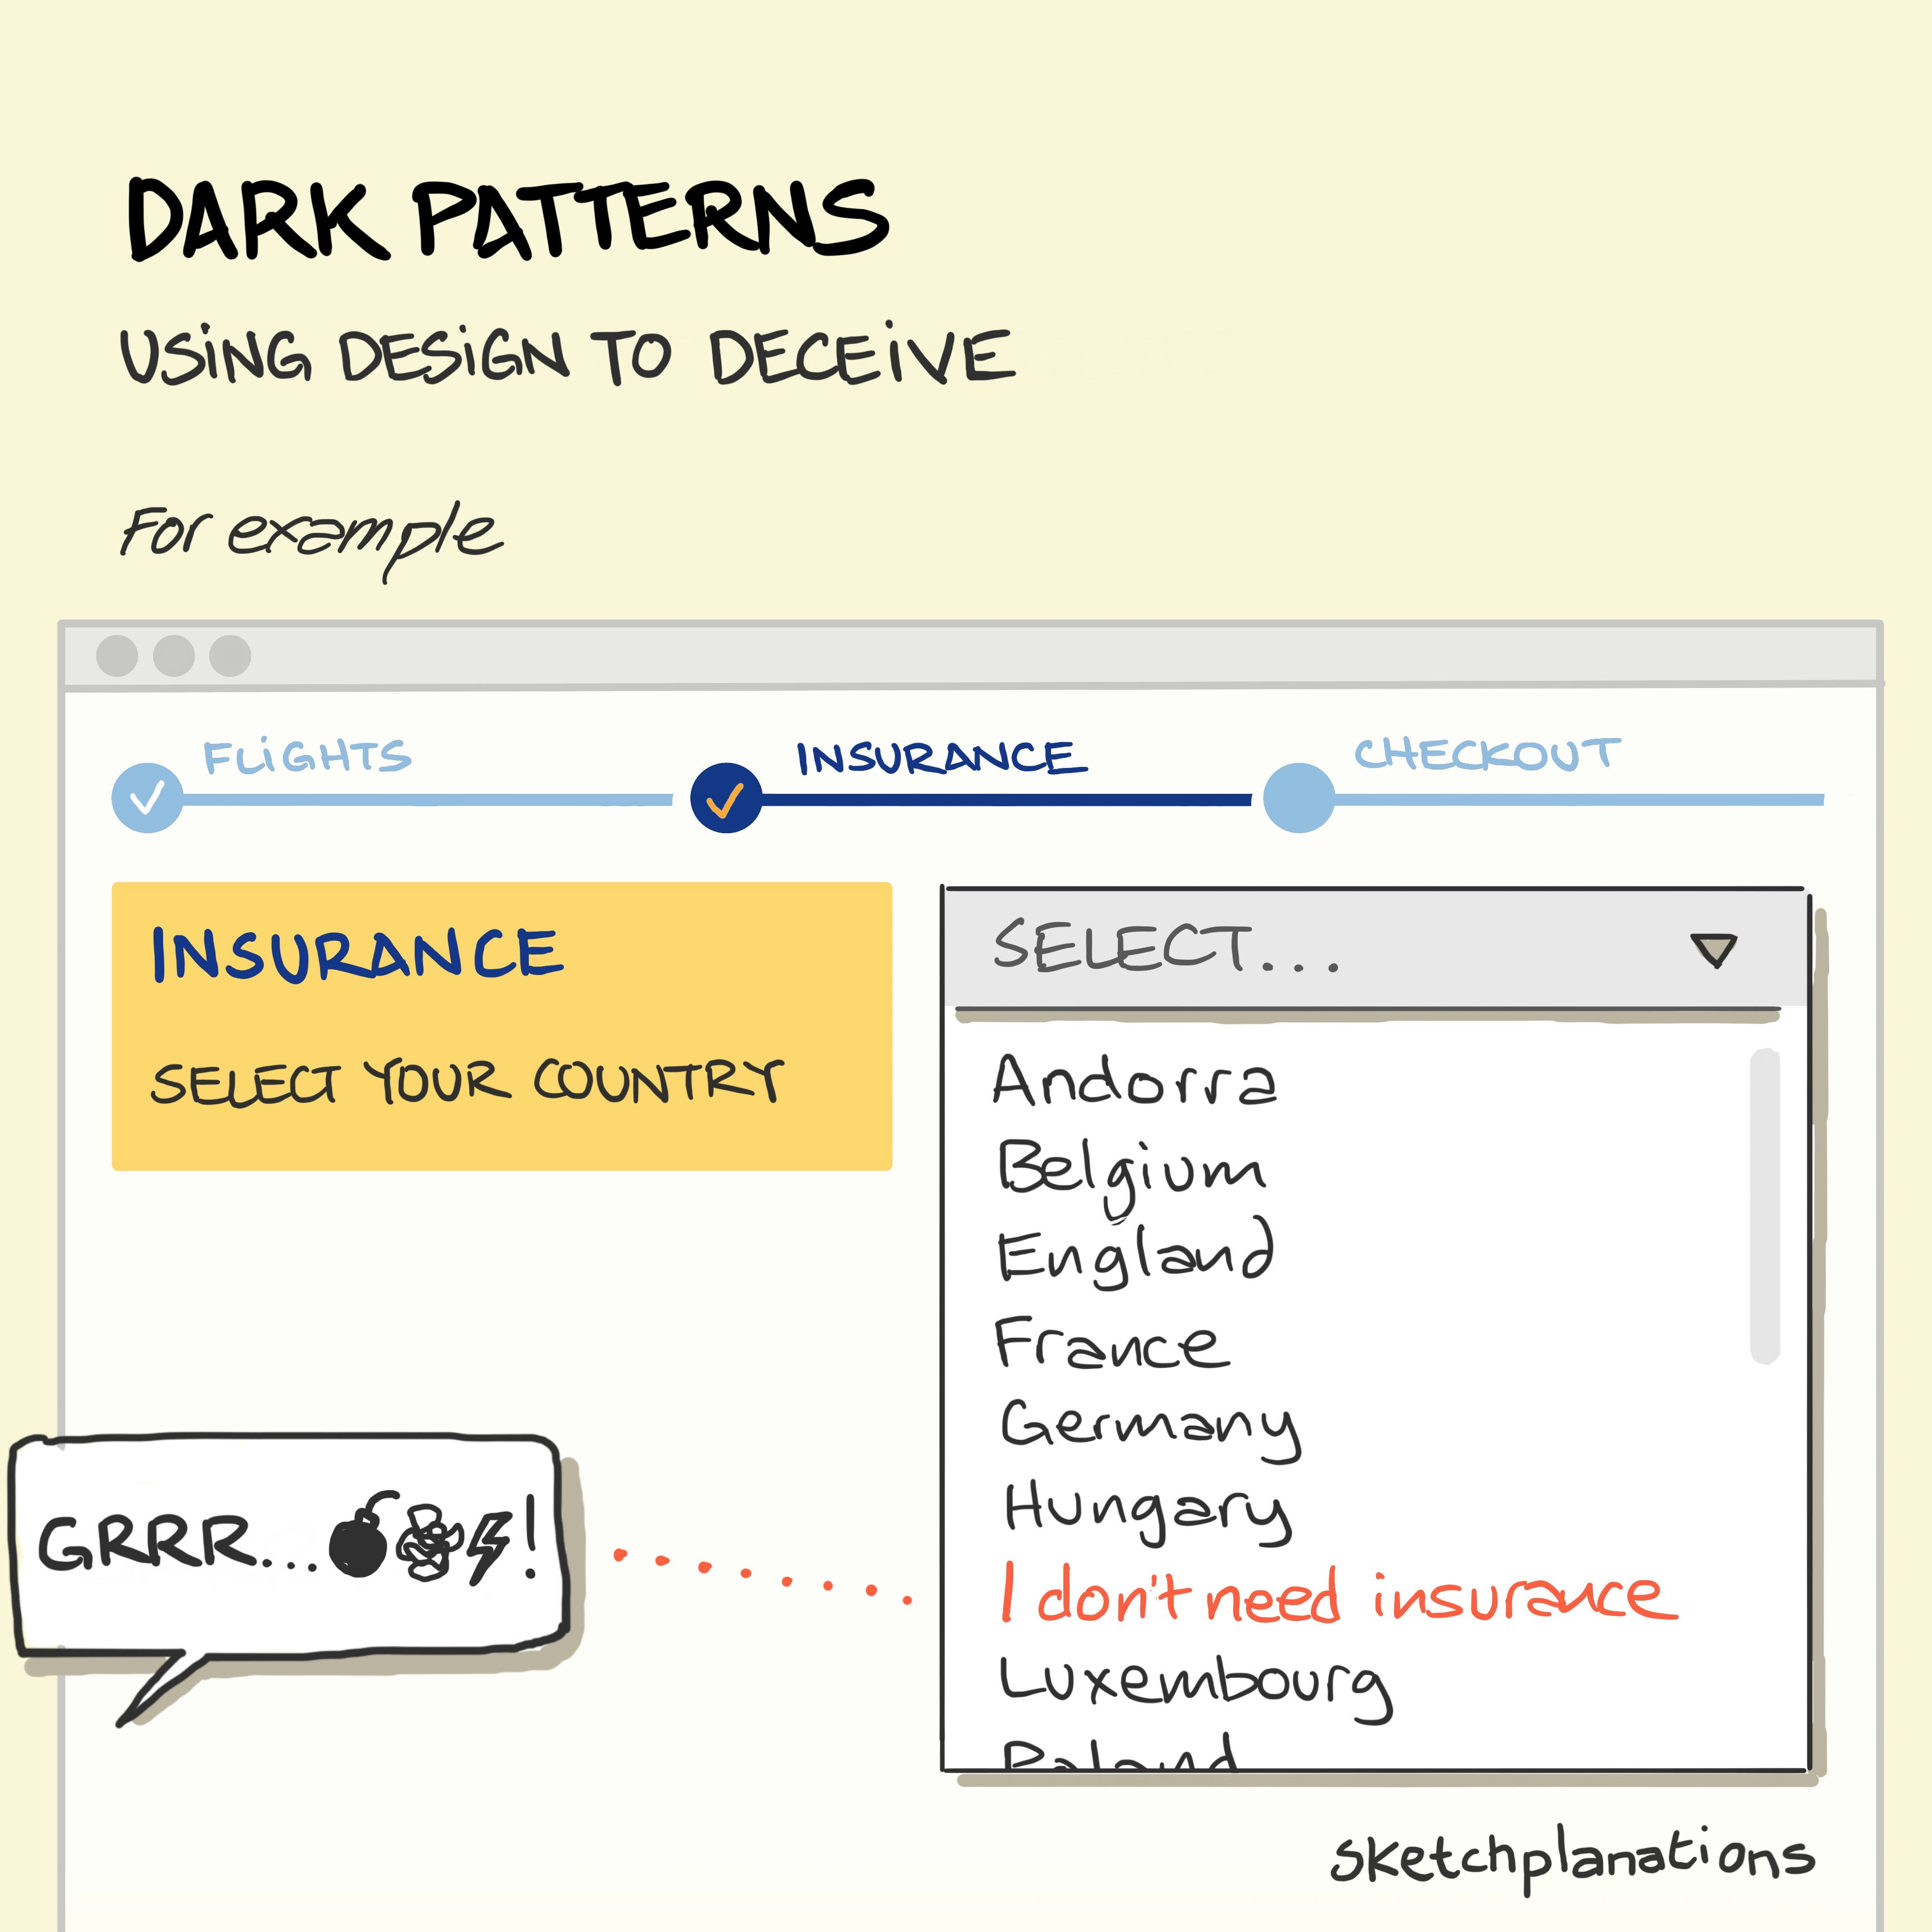 Dark patterns: using design to deceive, like hiding the 'I don't need insurance' option in the country list rather than as its own option